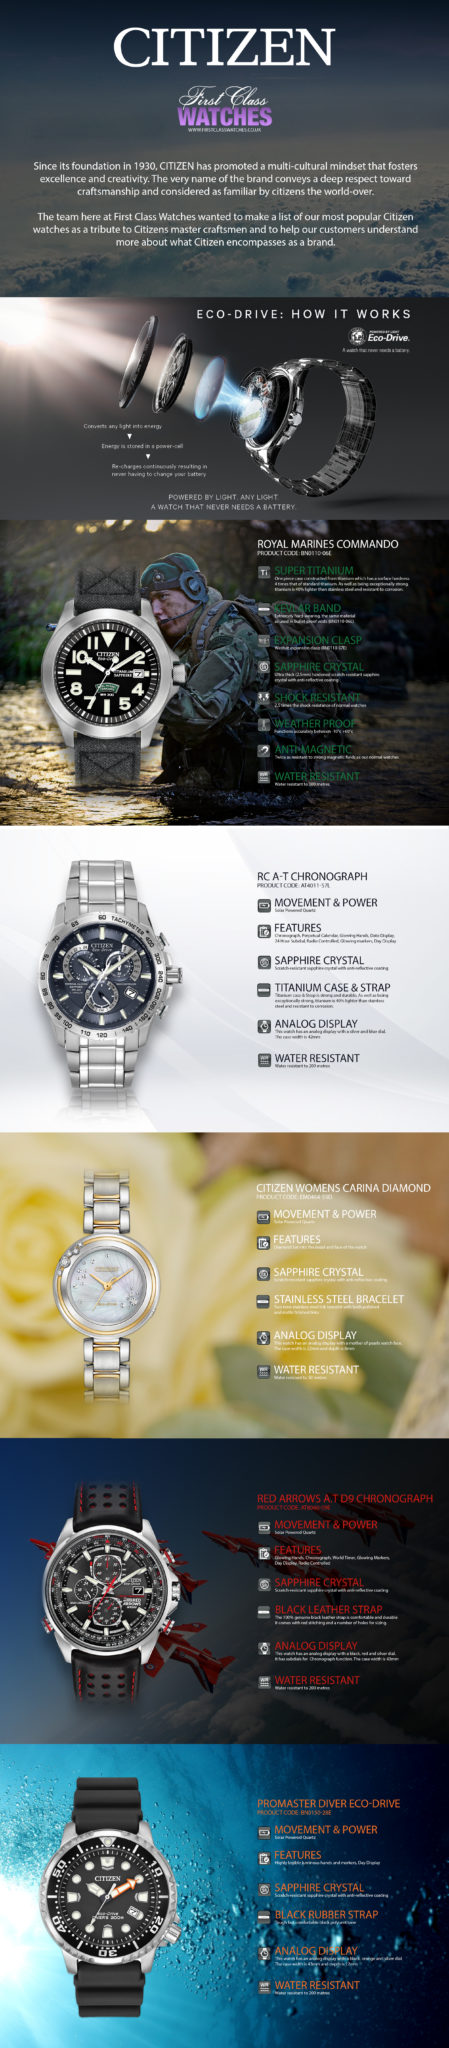 Our best Selling Citizen Watches - First Class Watches Blog